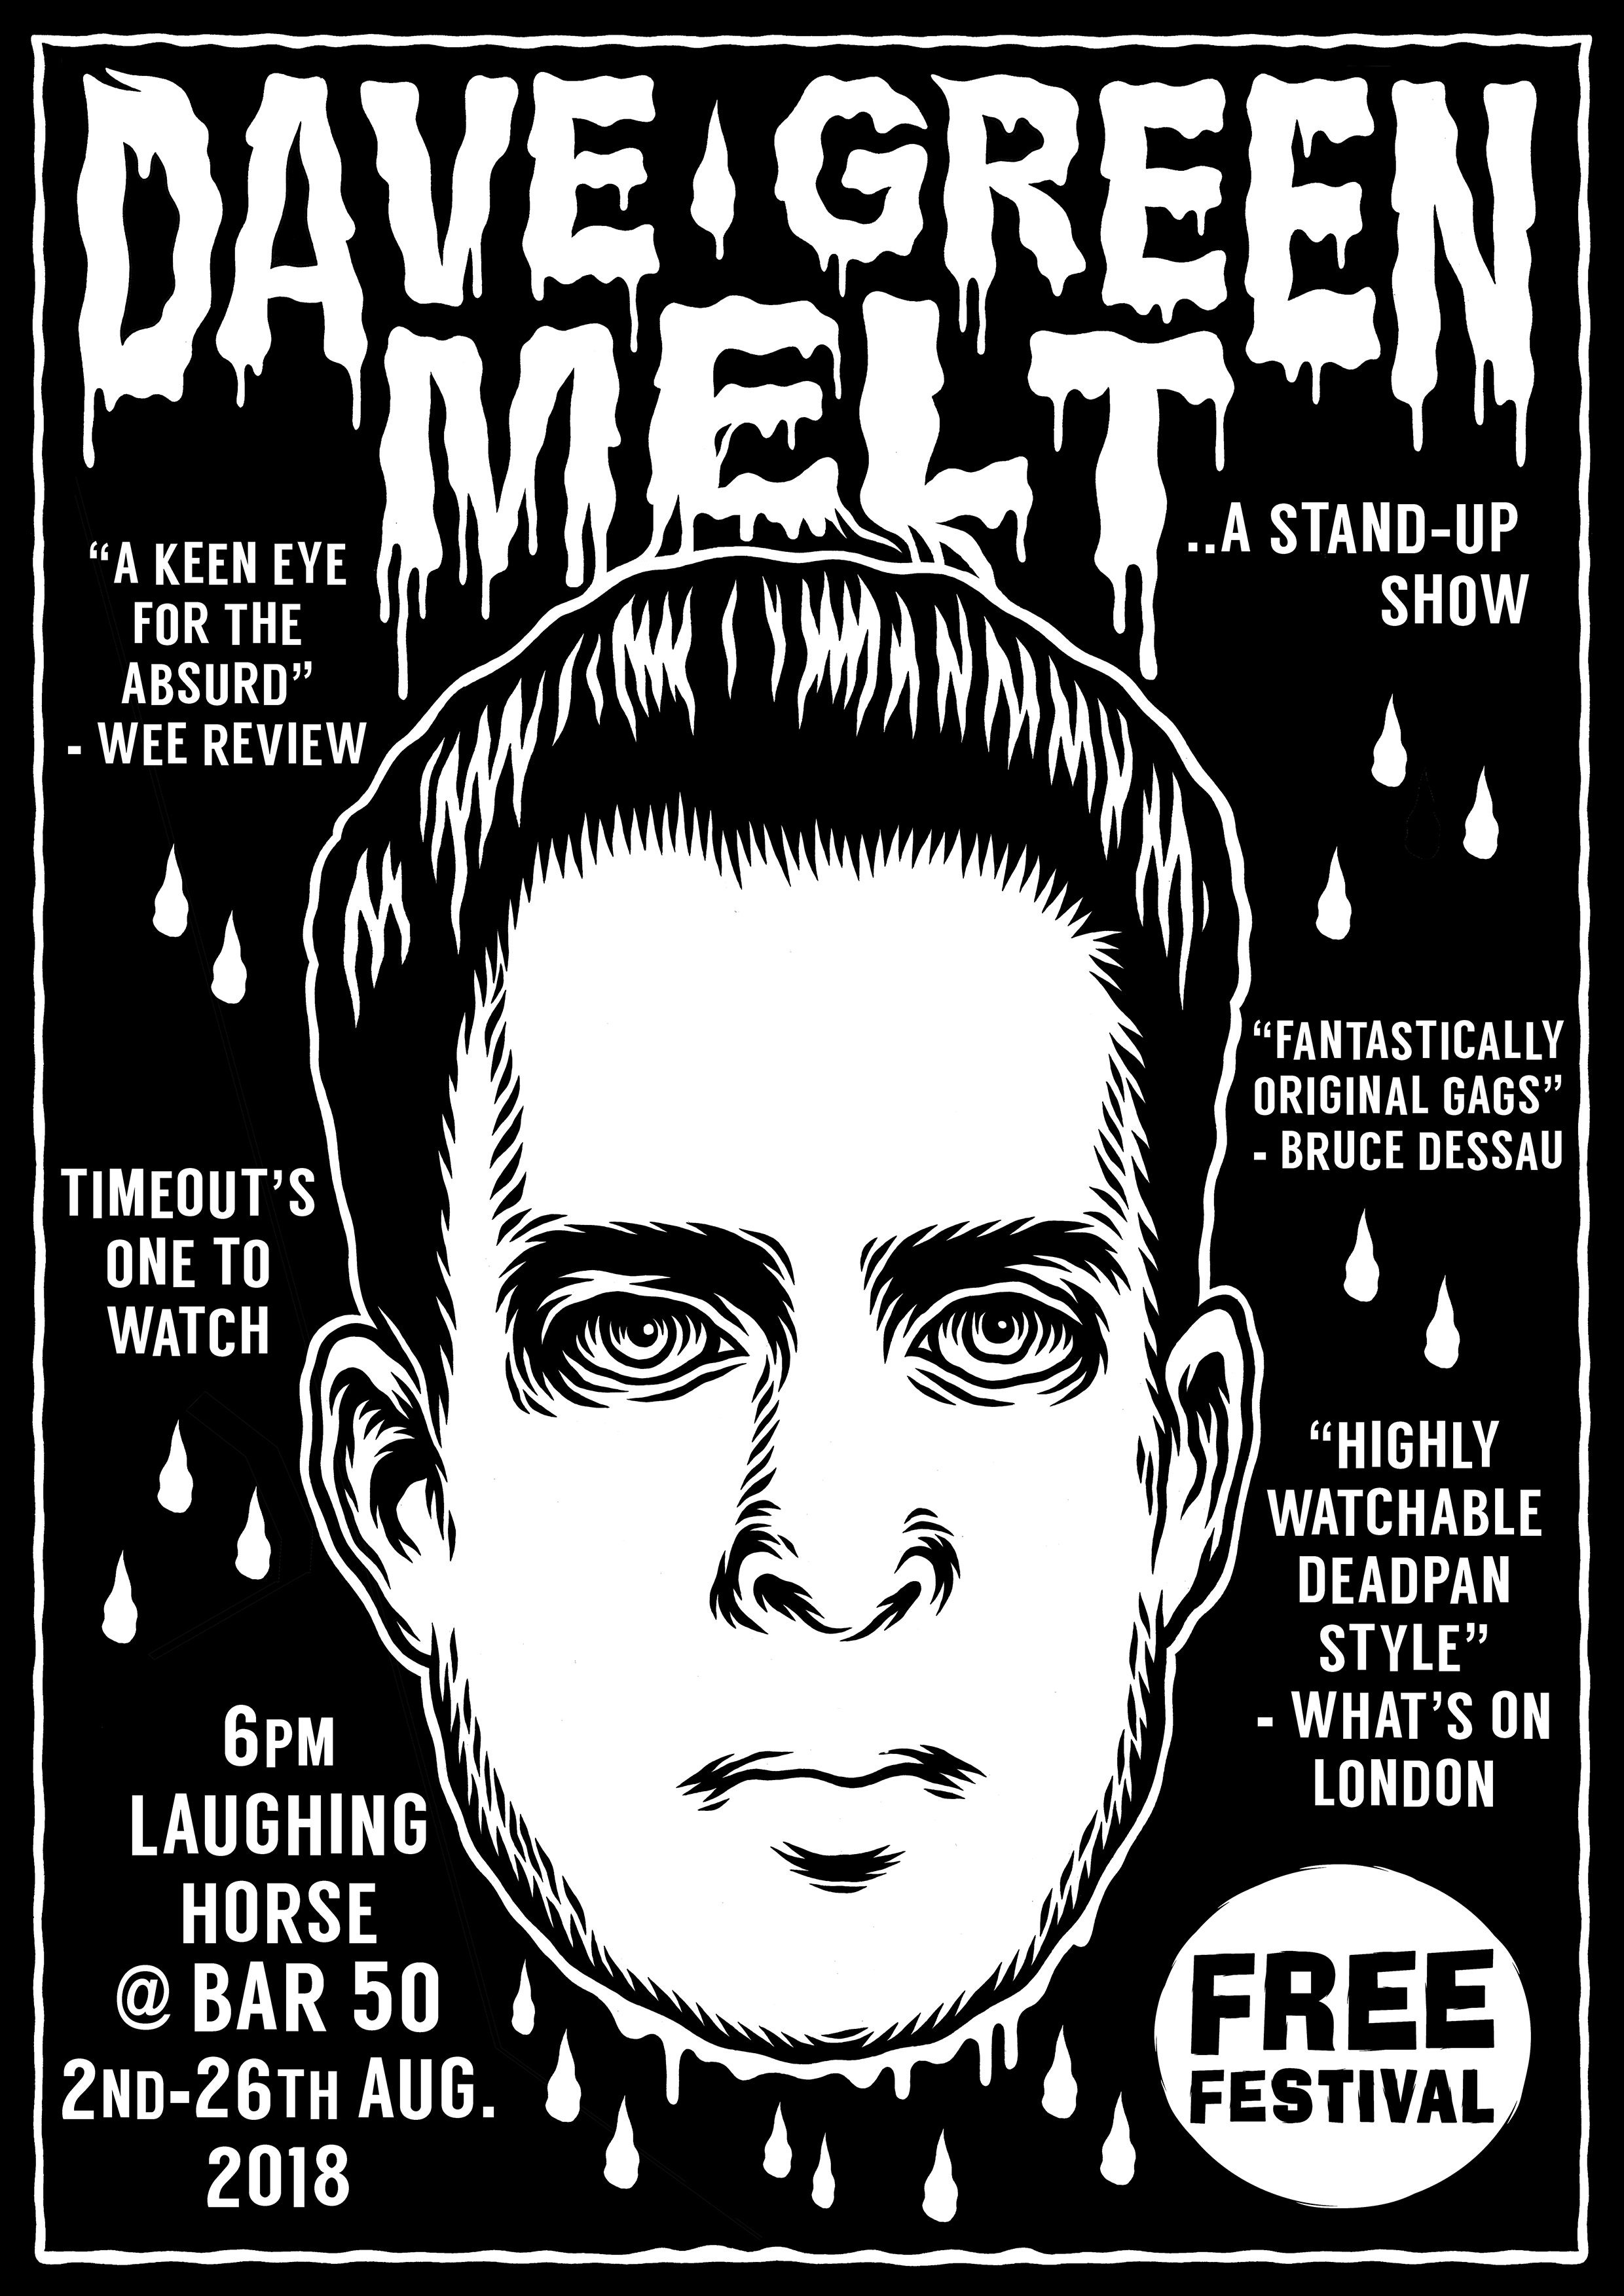 The poster for Dave Green: Melt